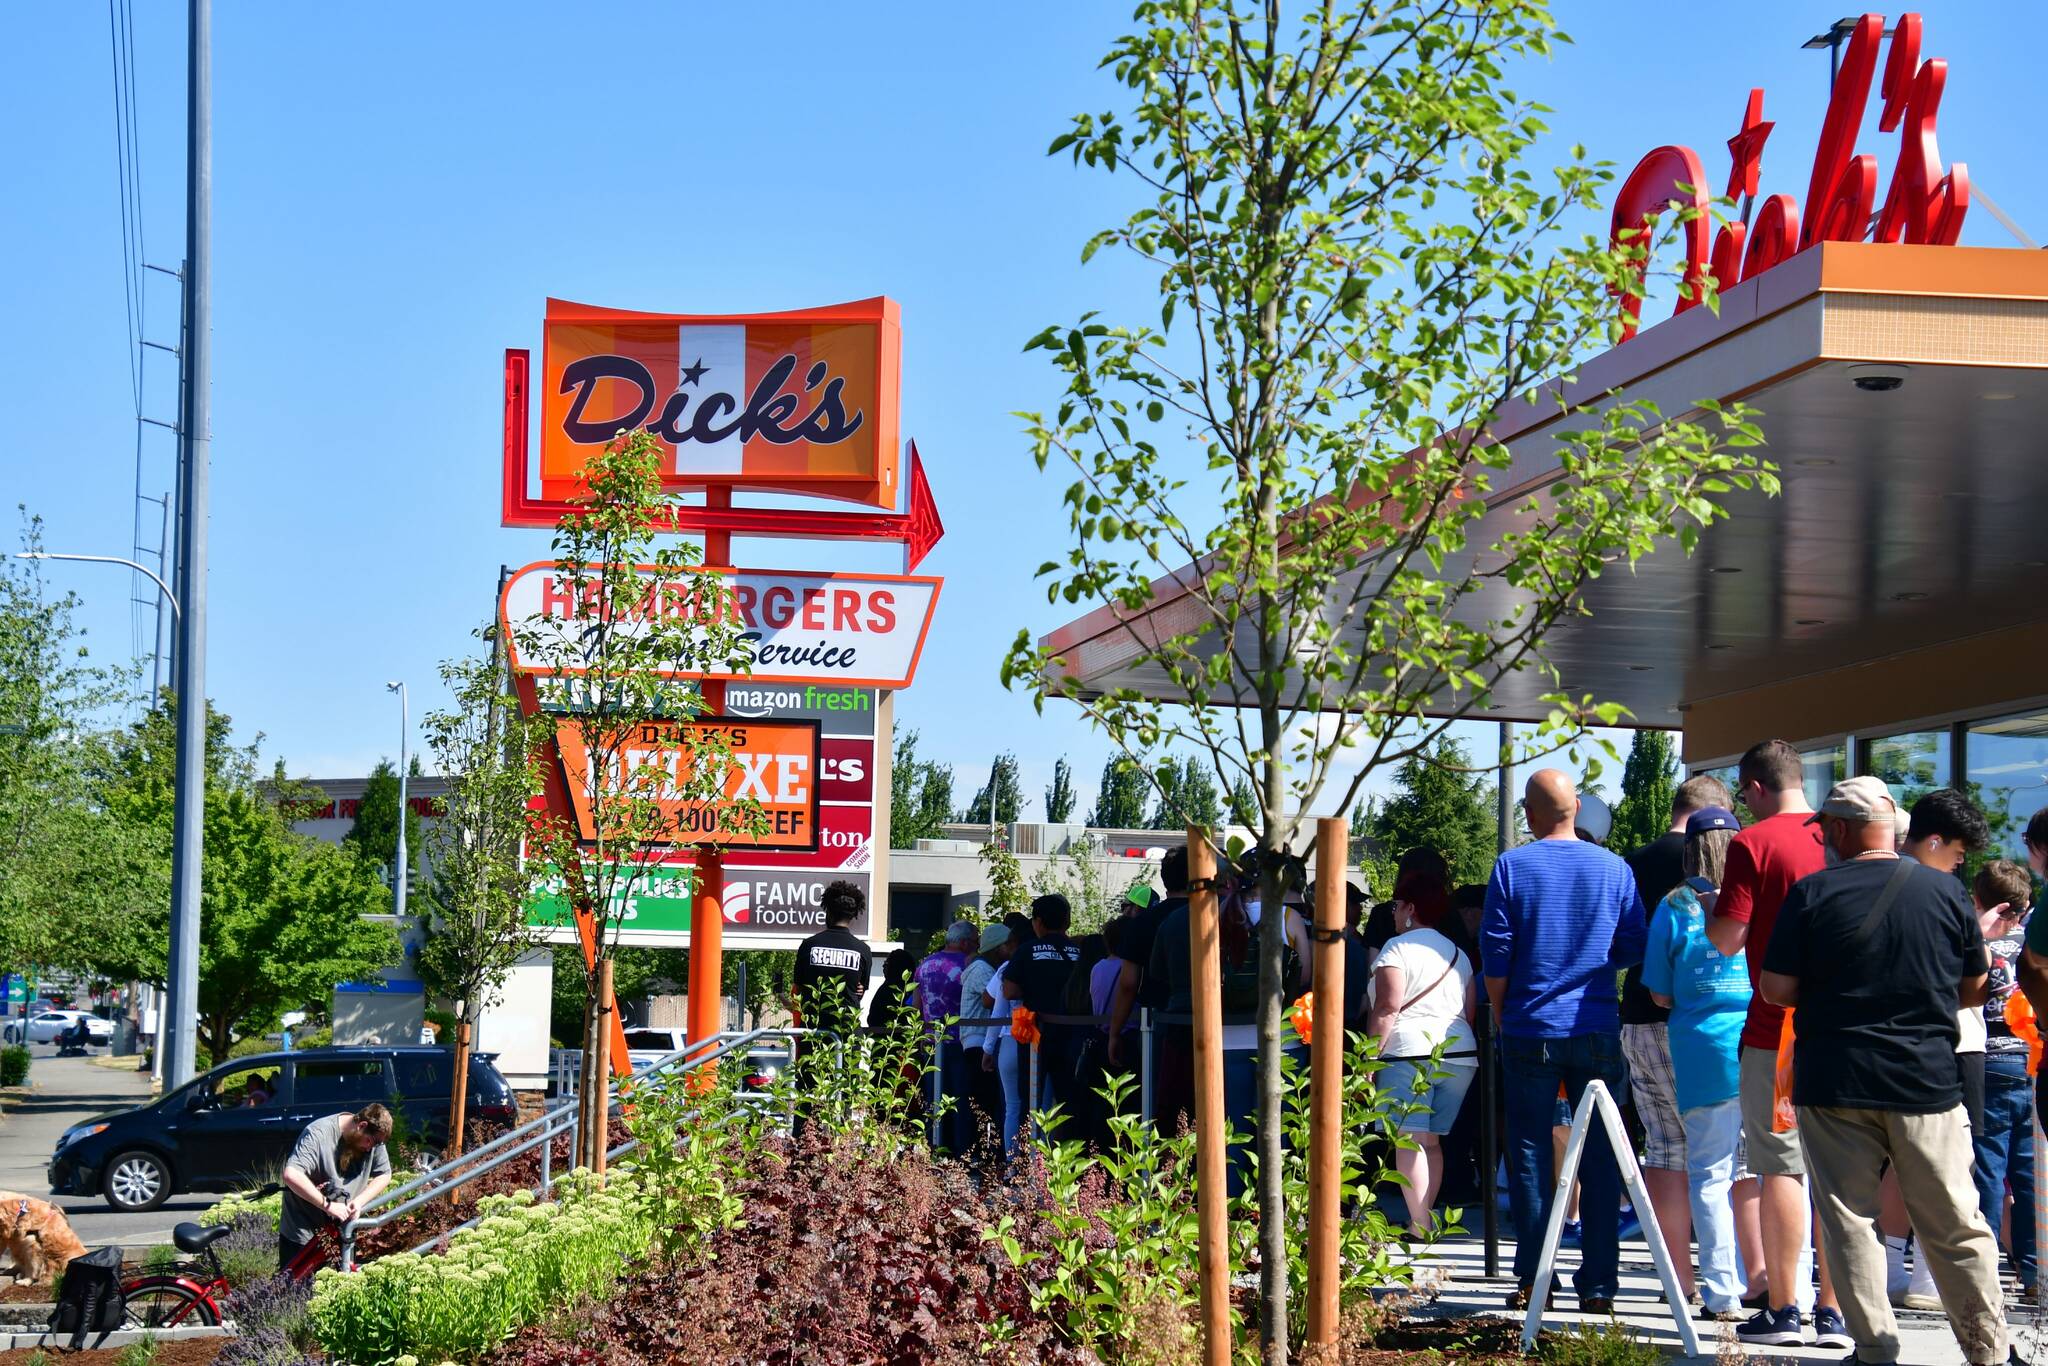 Dick’s Drive-In opened July 27 on the west side of the Commons Mall, facing Pacific Highway South. (Photo by Bruce Honda)